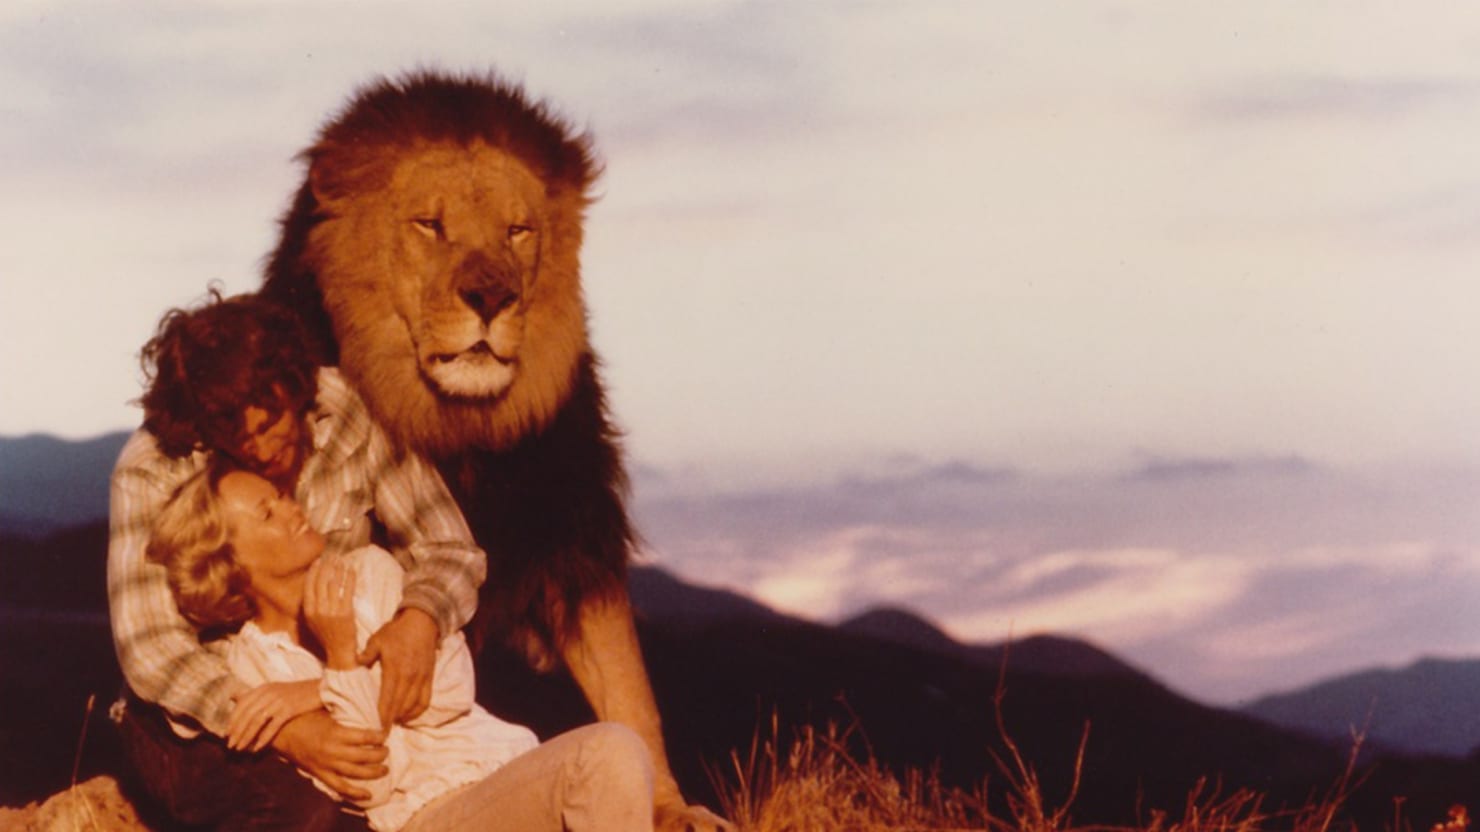 Roar': The Most Dangerous Movie Ever Made